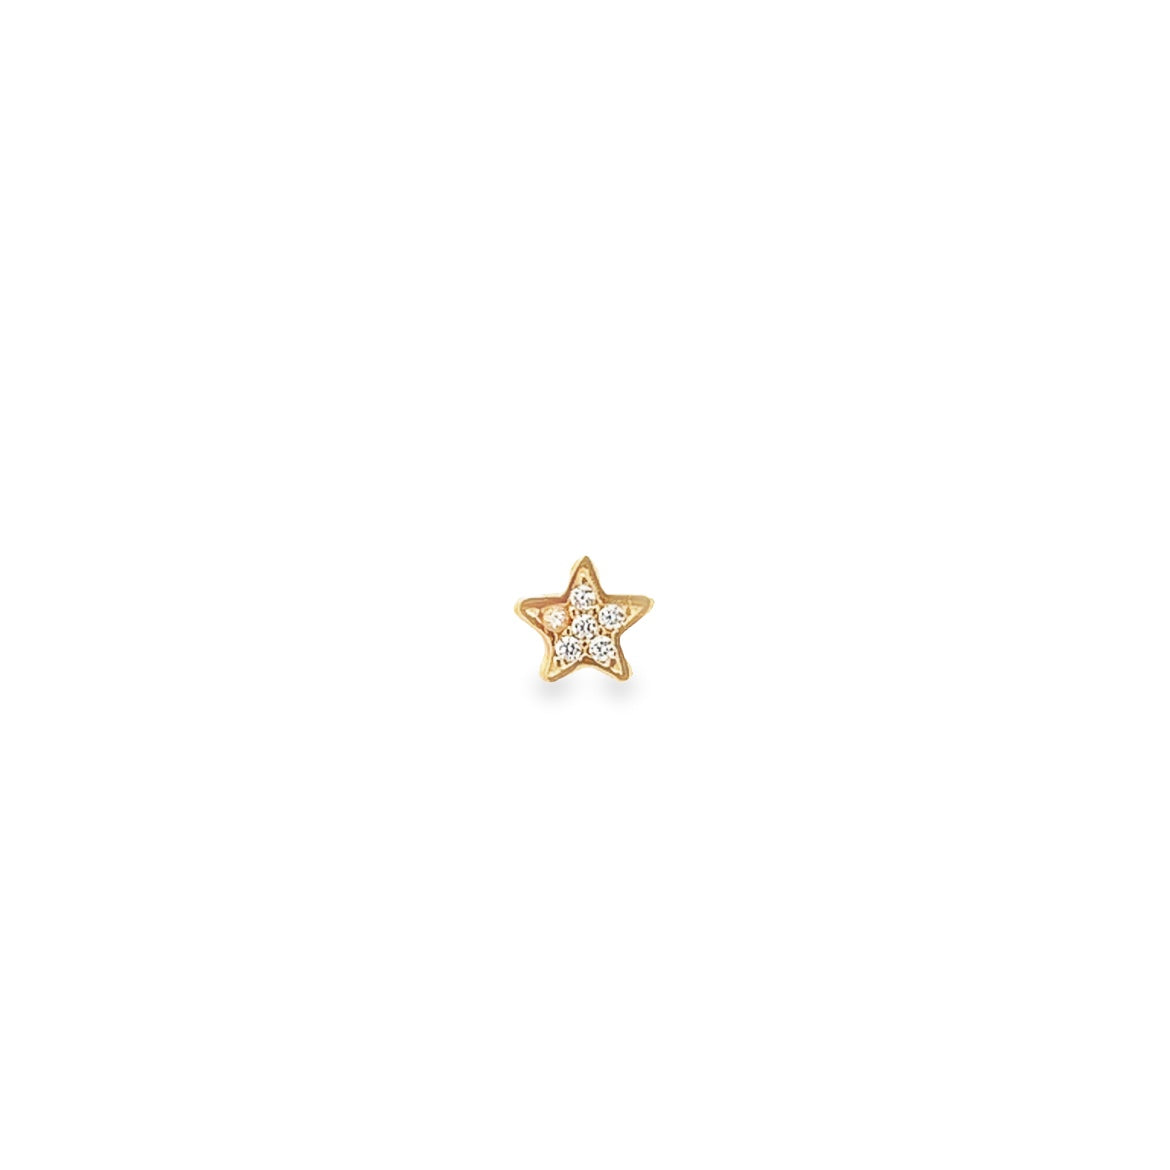 14K GOLD SINGLE STAR PIERCING WITH CRYSTALS